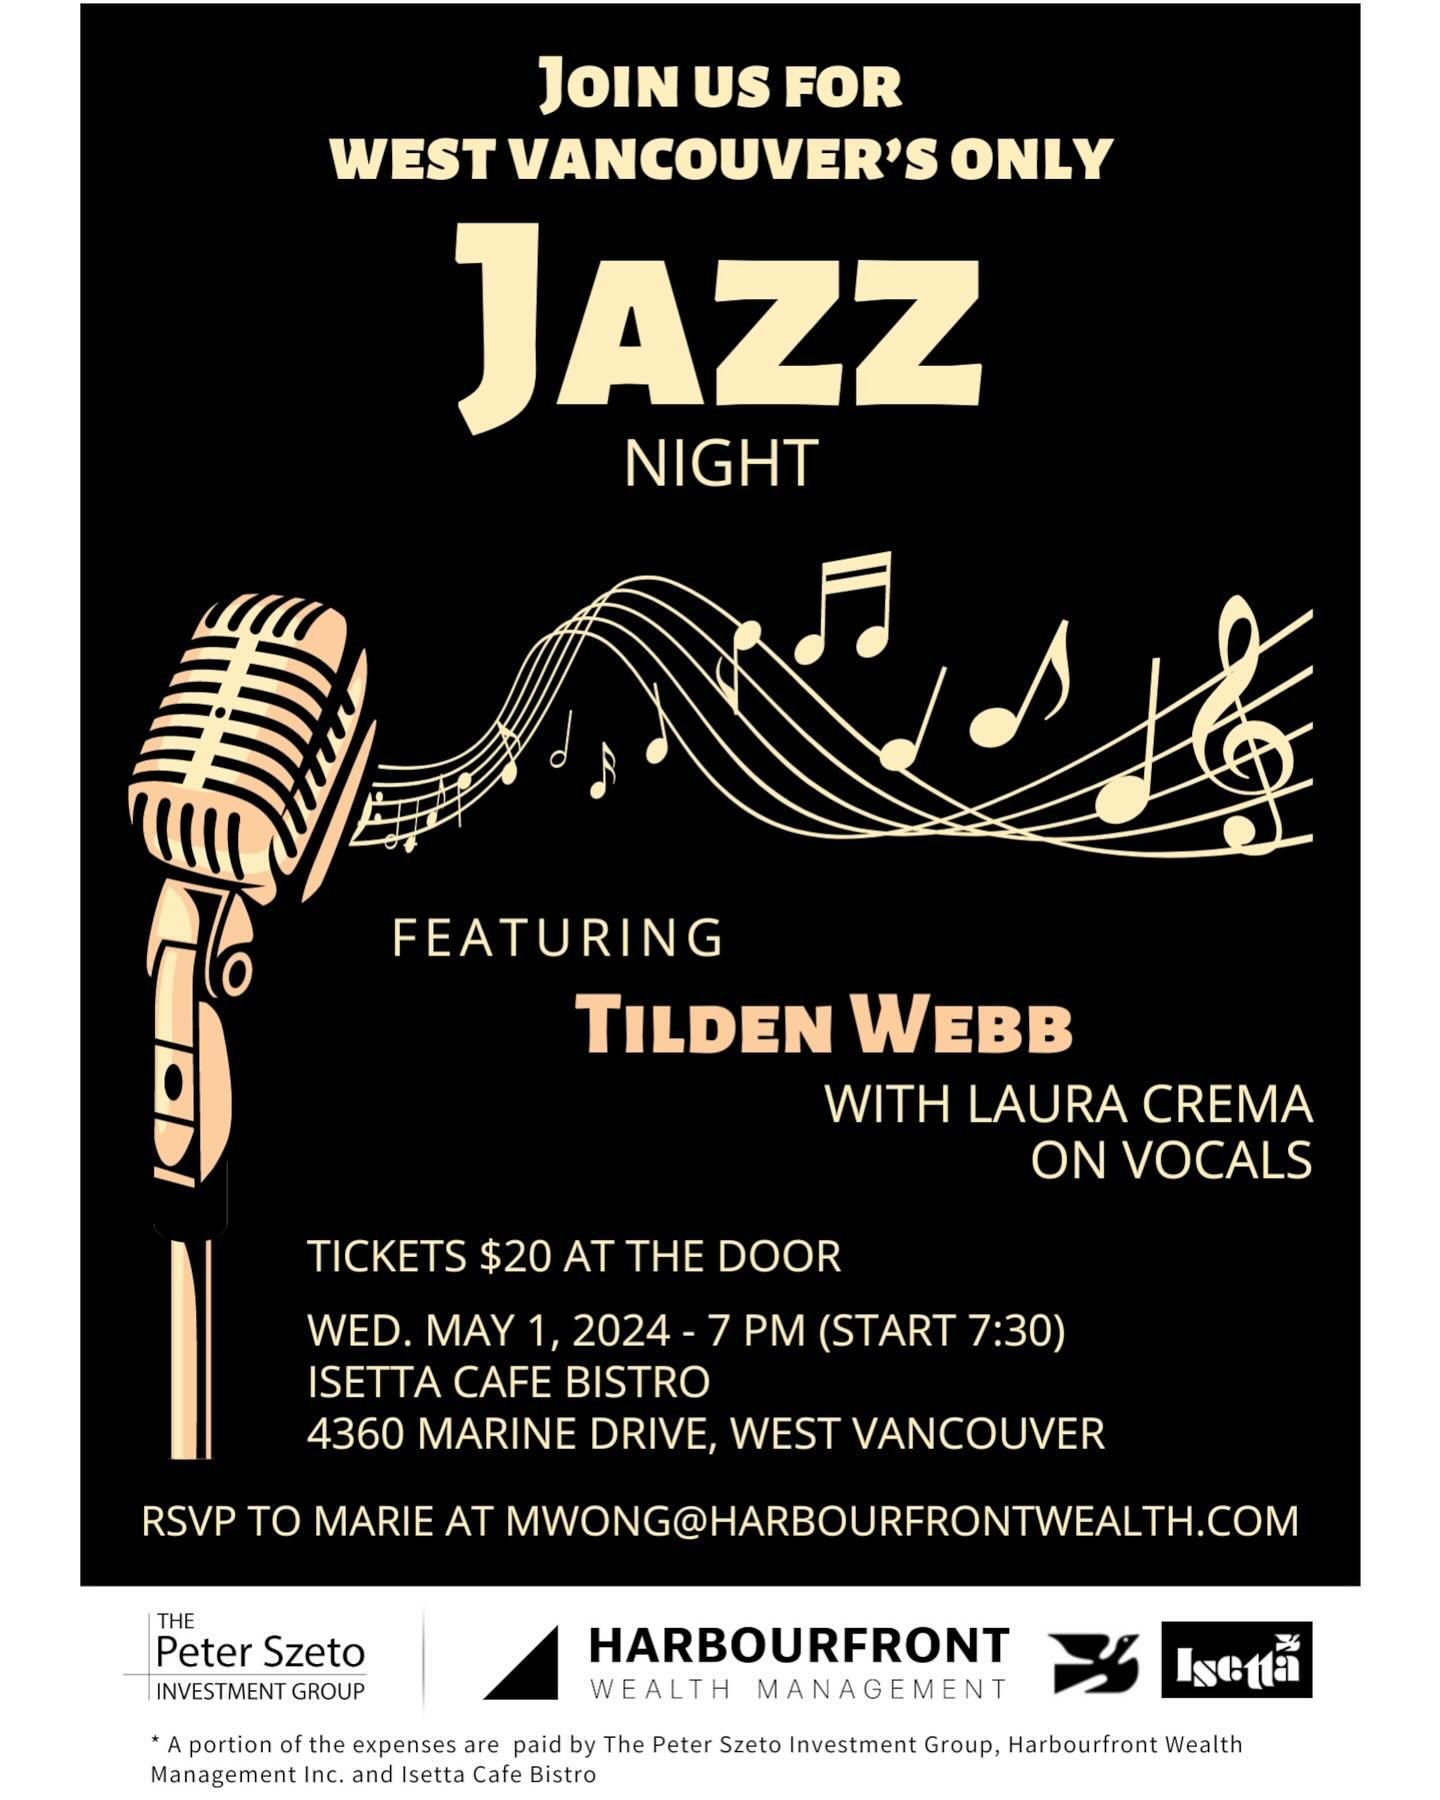 May 1st will be our 3rd year anniversary!!! We have partnered up with @pcwszeto from Habourfront Wealth Managemant to bring to you some live #jazz music featuring Tilden Webb and Laura Crema on vocals. 7pm Doors open, 7:30 start time! 
$20 a ticket a